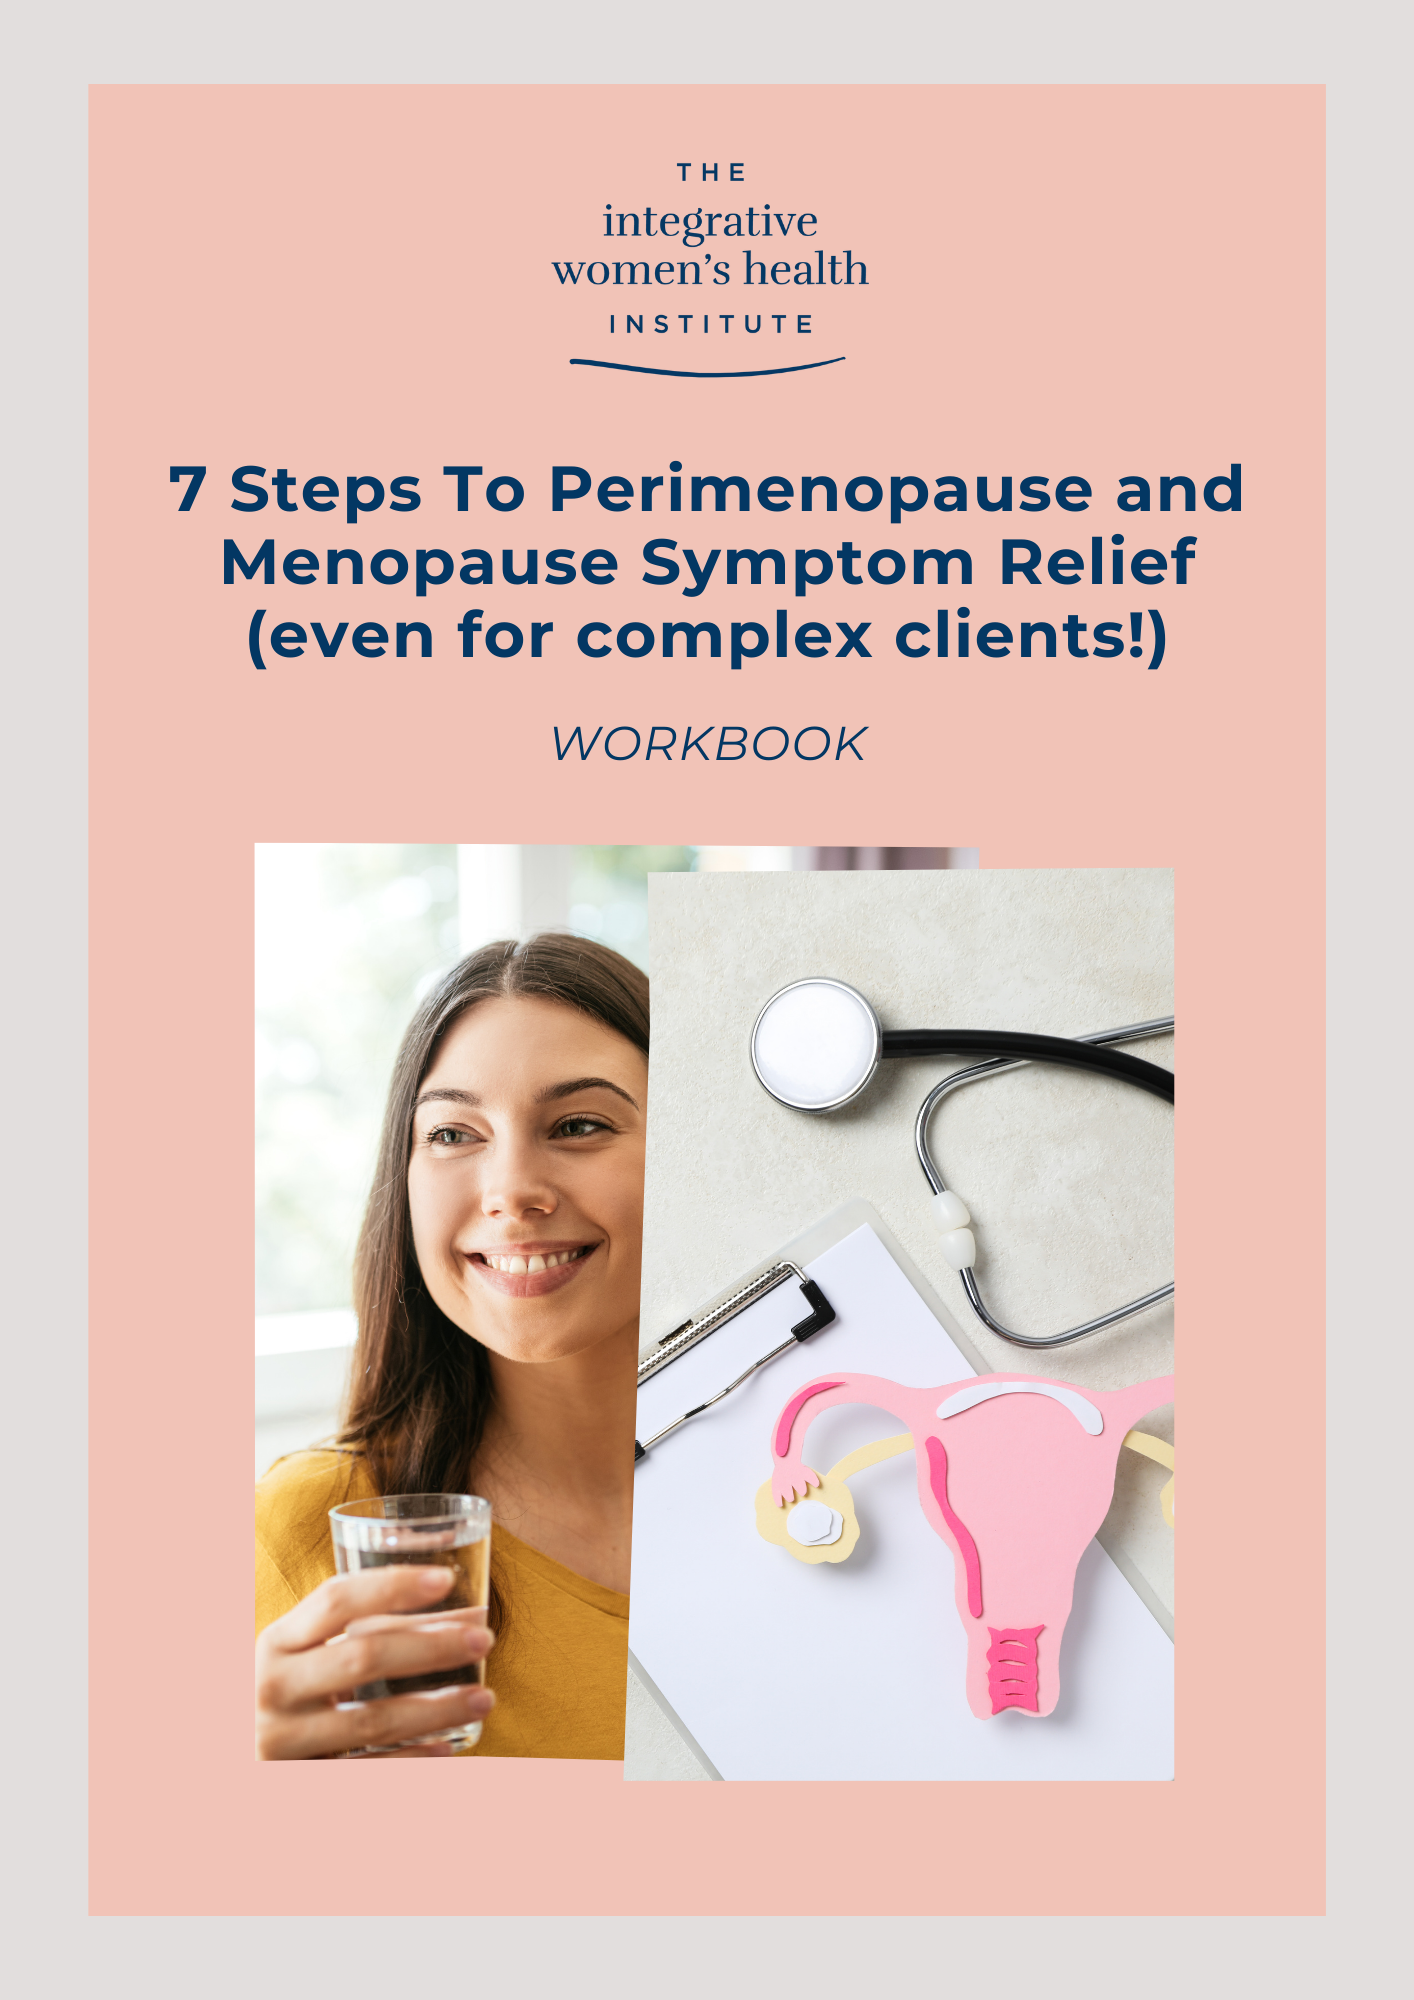 7 Steps to Perimenopause and Menopause Symptom Relief Even for Complex Clients